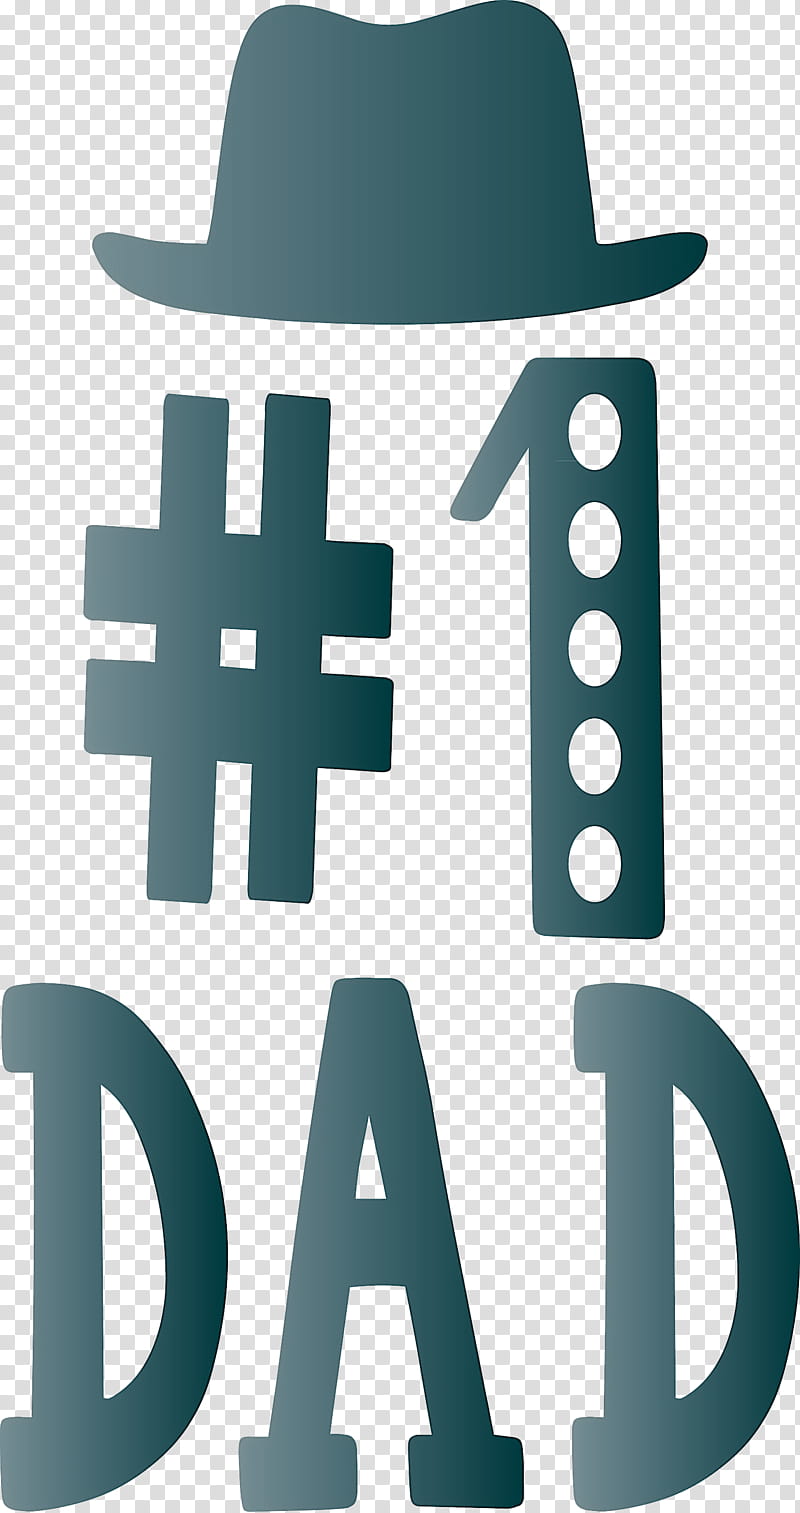 No1 dad Happy Fathers Day, Logo, Symbol, Headgear, Teal, Text transparent background PNG clipart